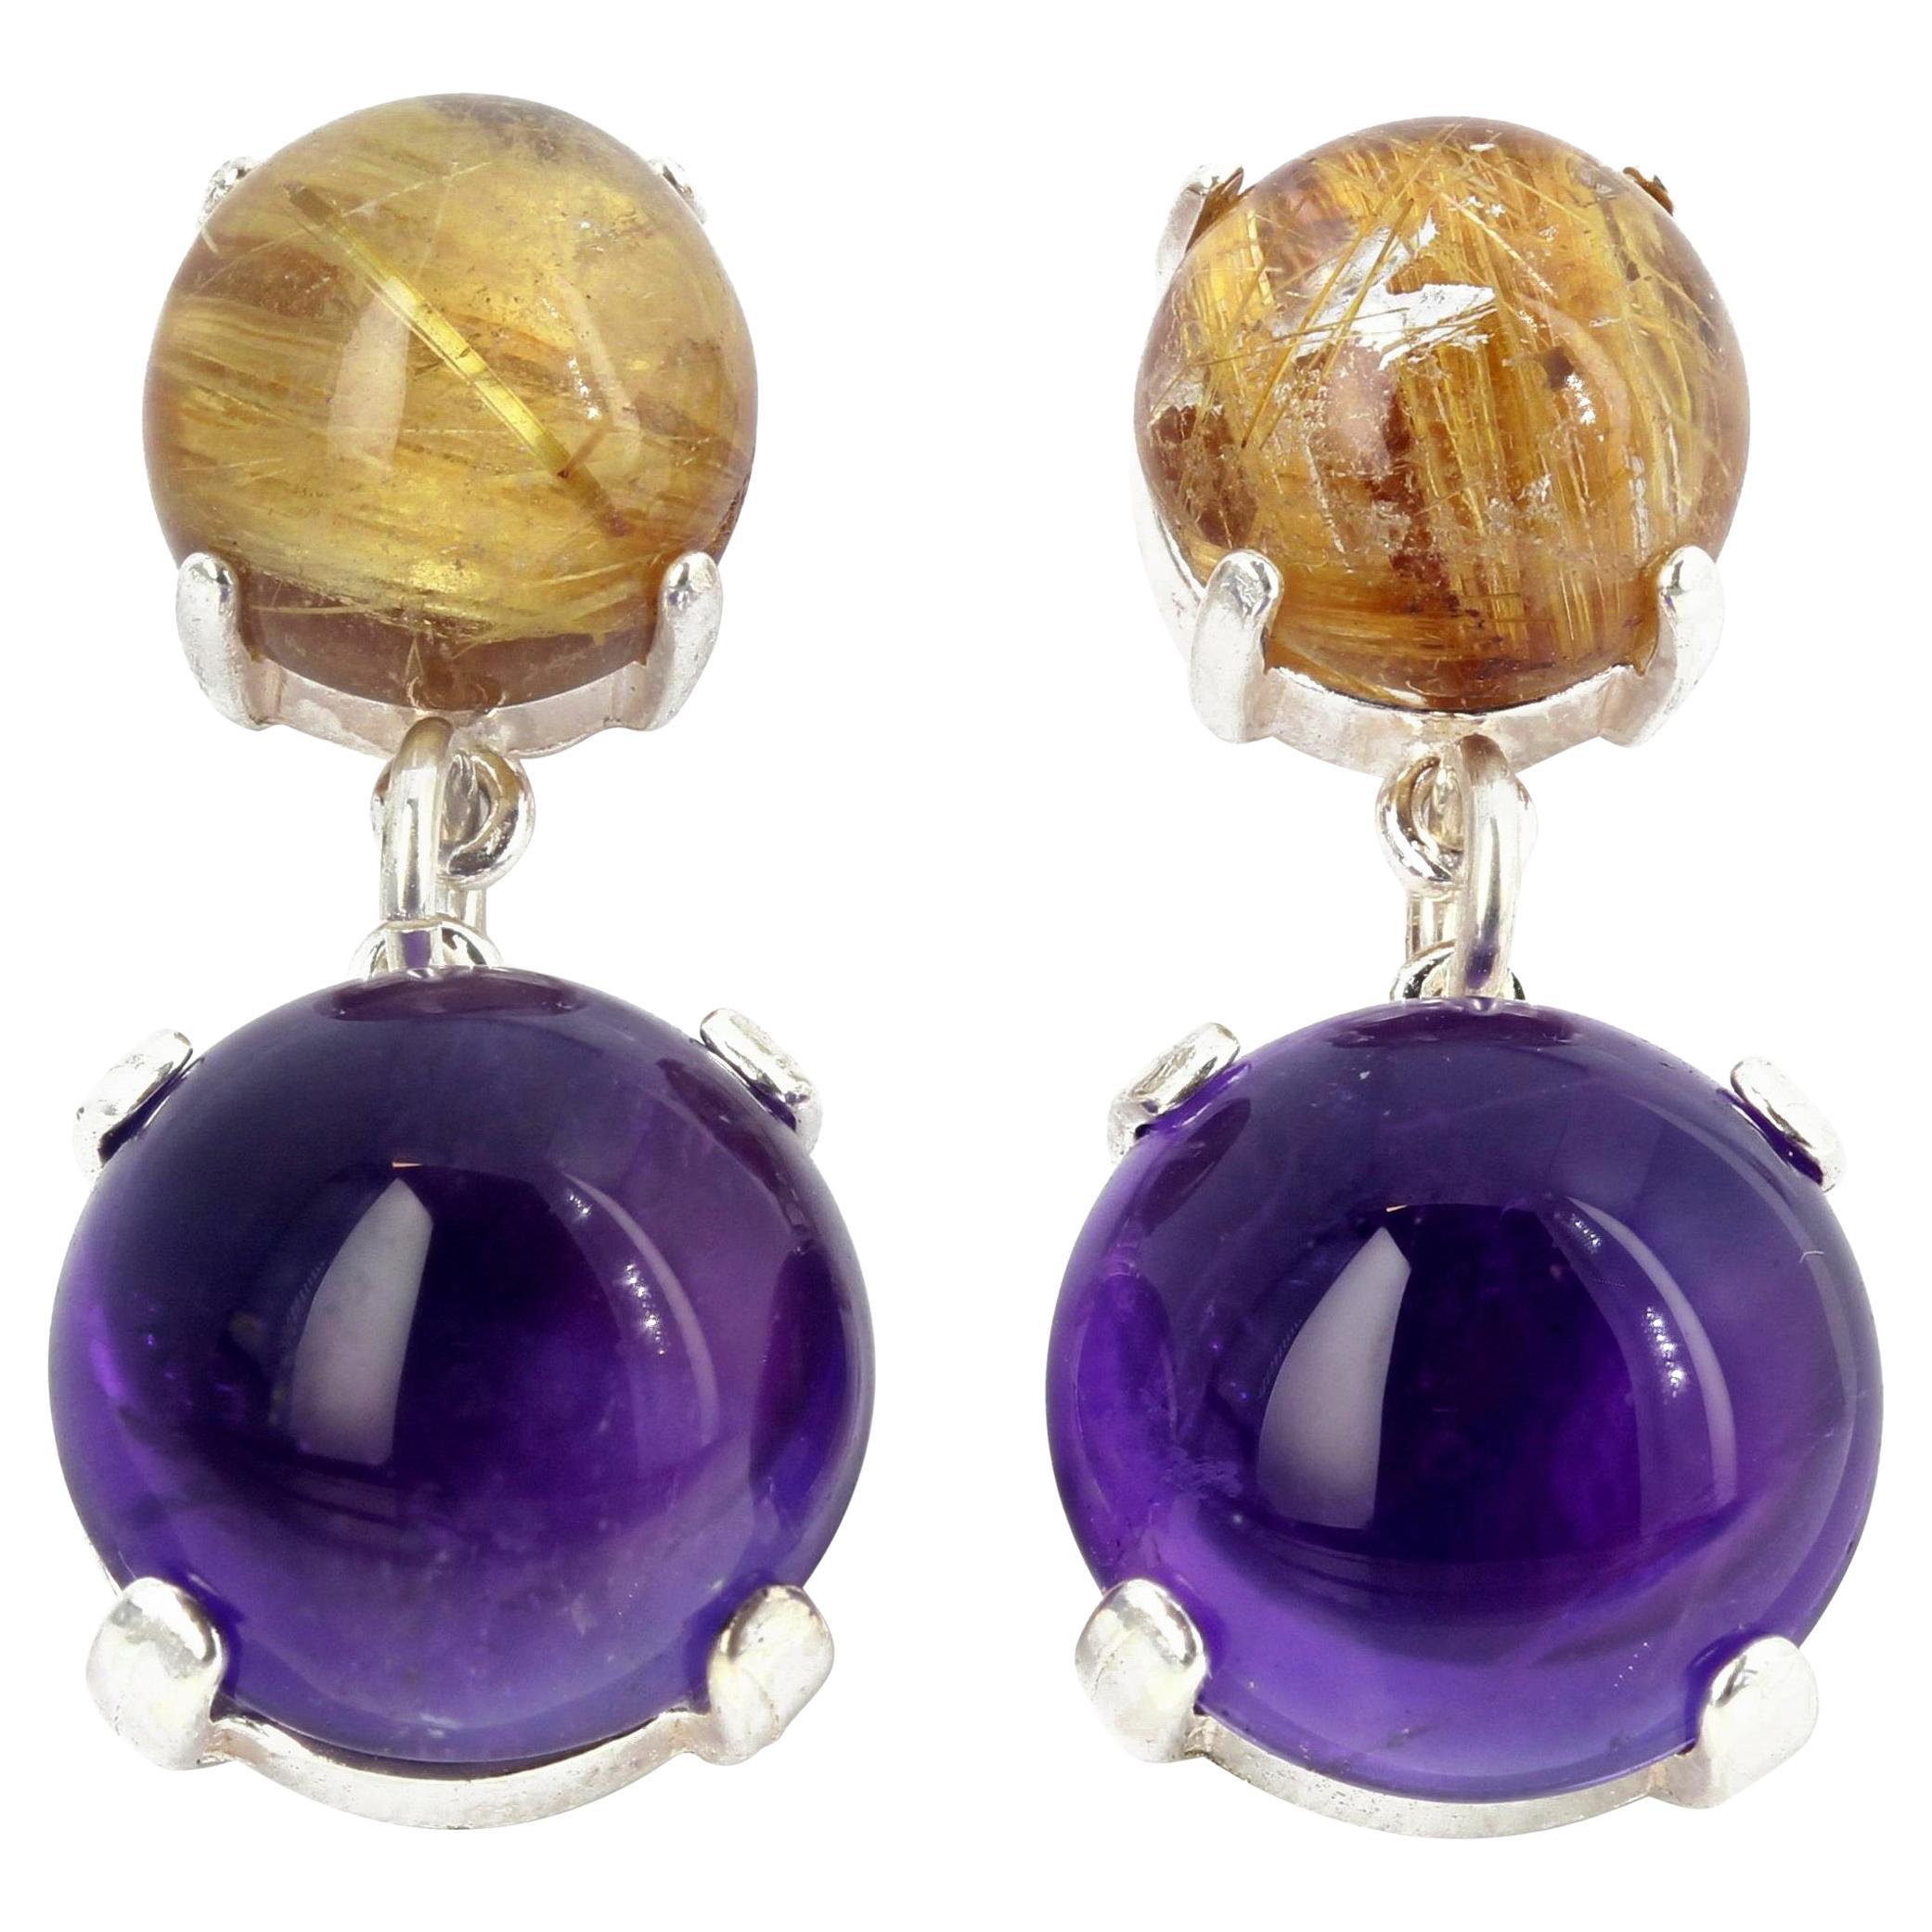 AJD Exquisite Rare Golden Rutilated Quartz & Amethyst Sterling Silver Earrings For Sale